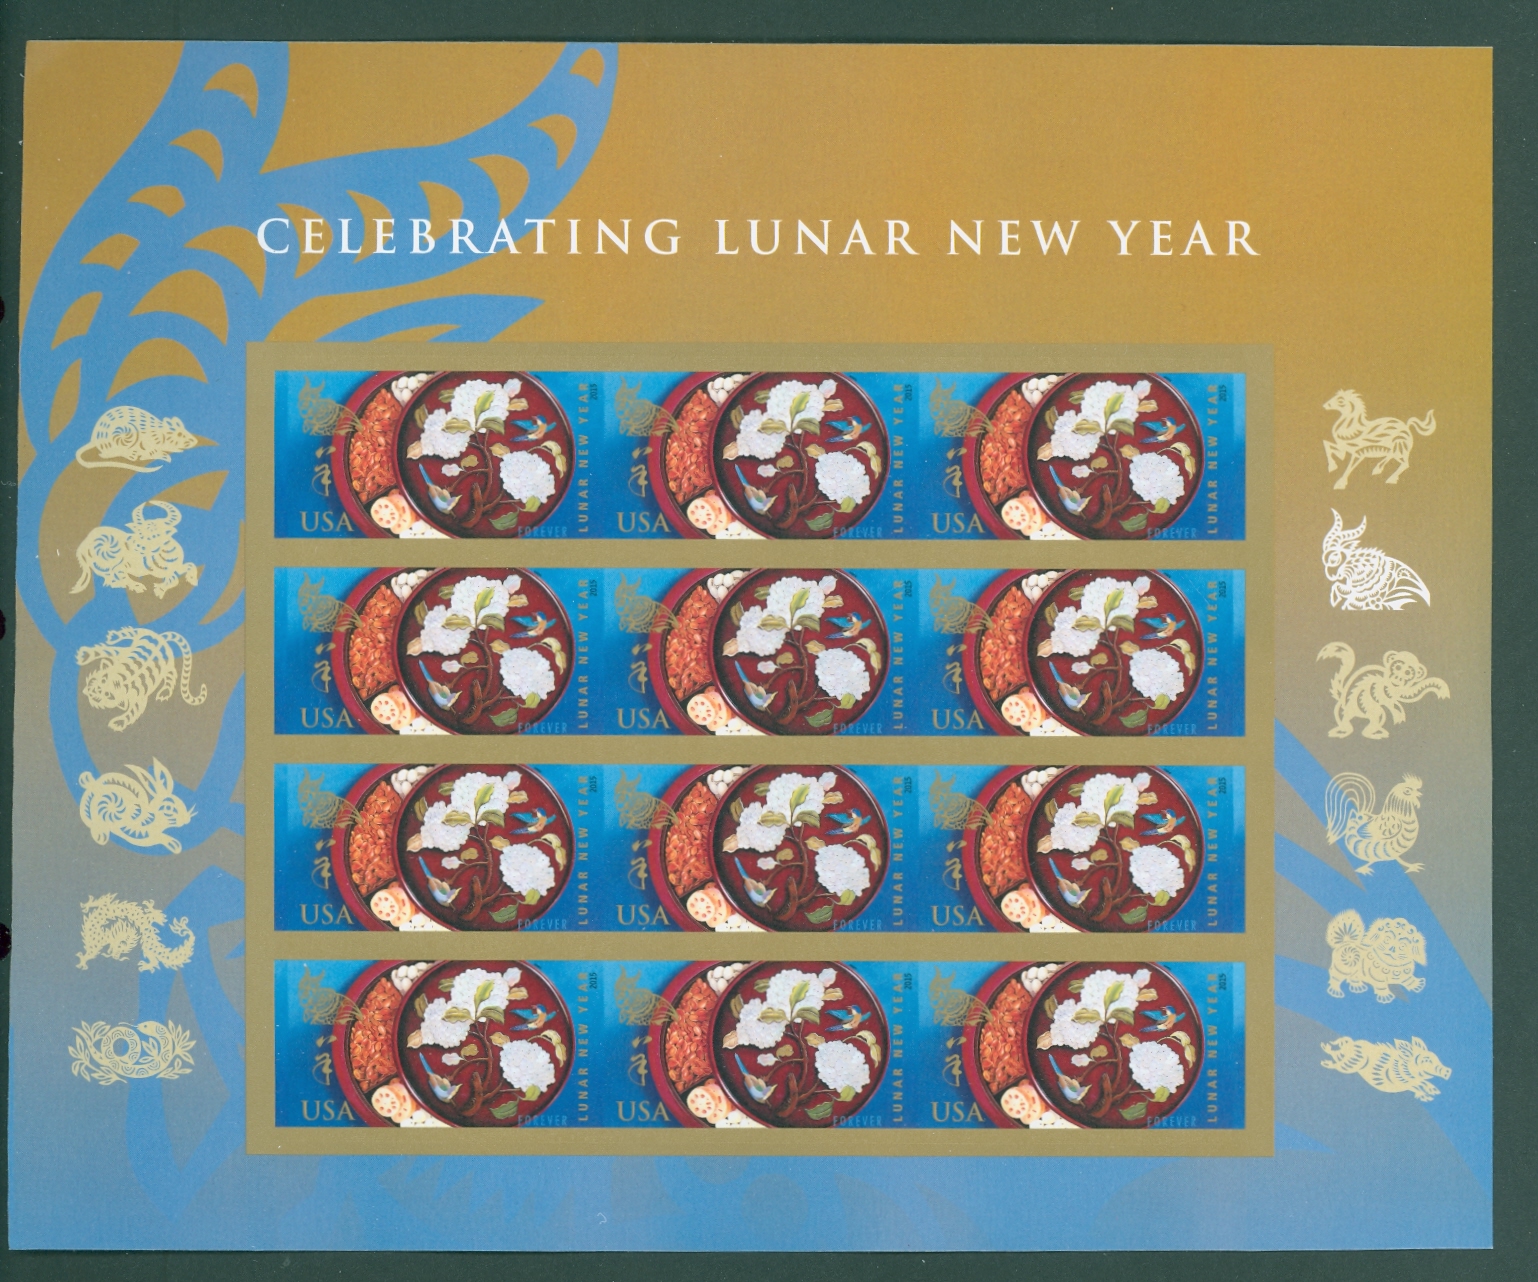 4957 Forever Lunar New Year, Year of the Ram, Mint Sheet of 12 #4957sh